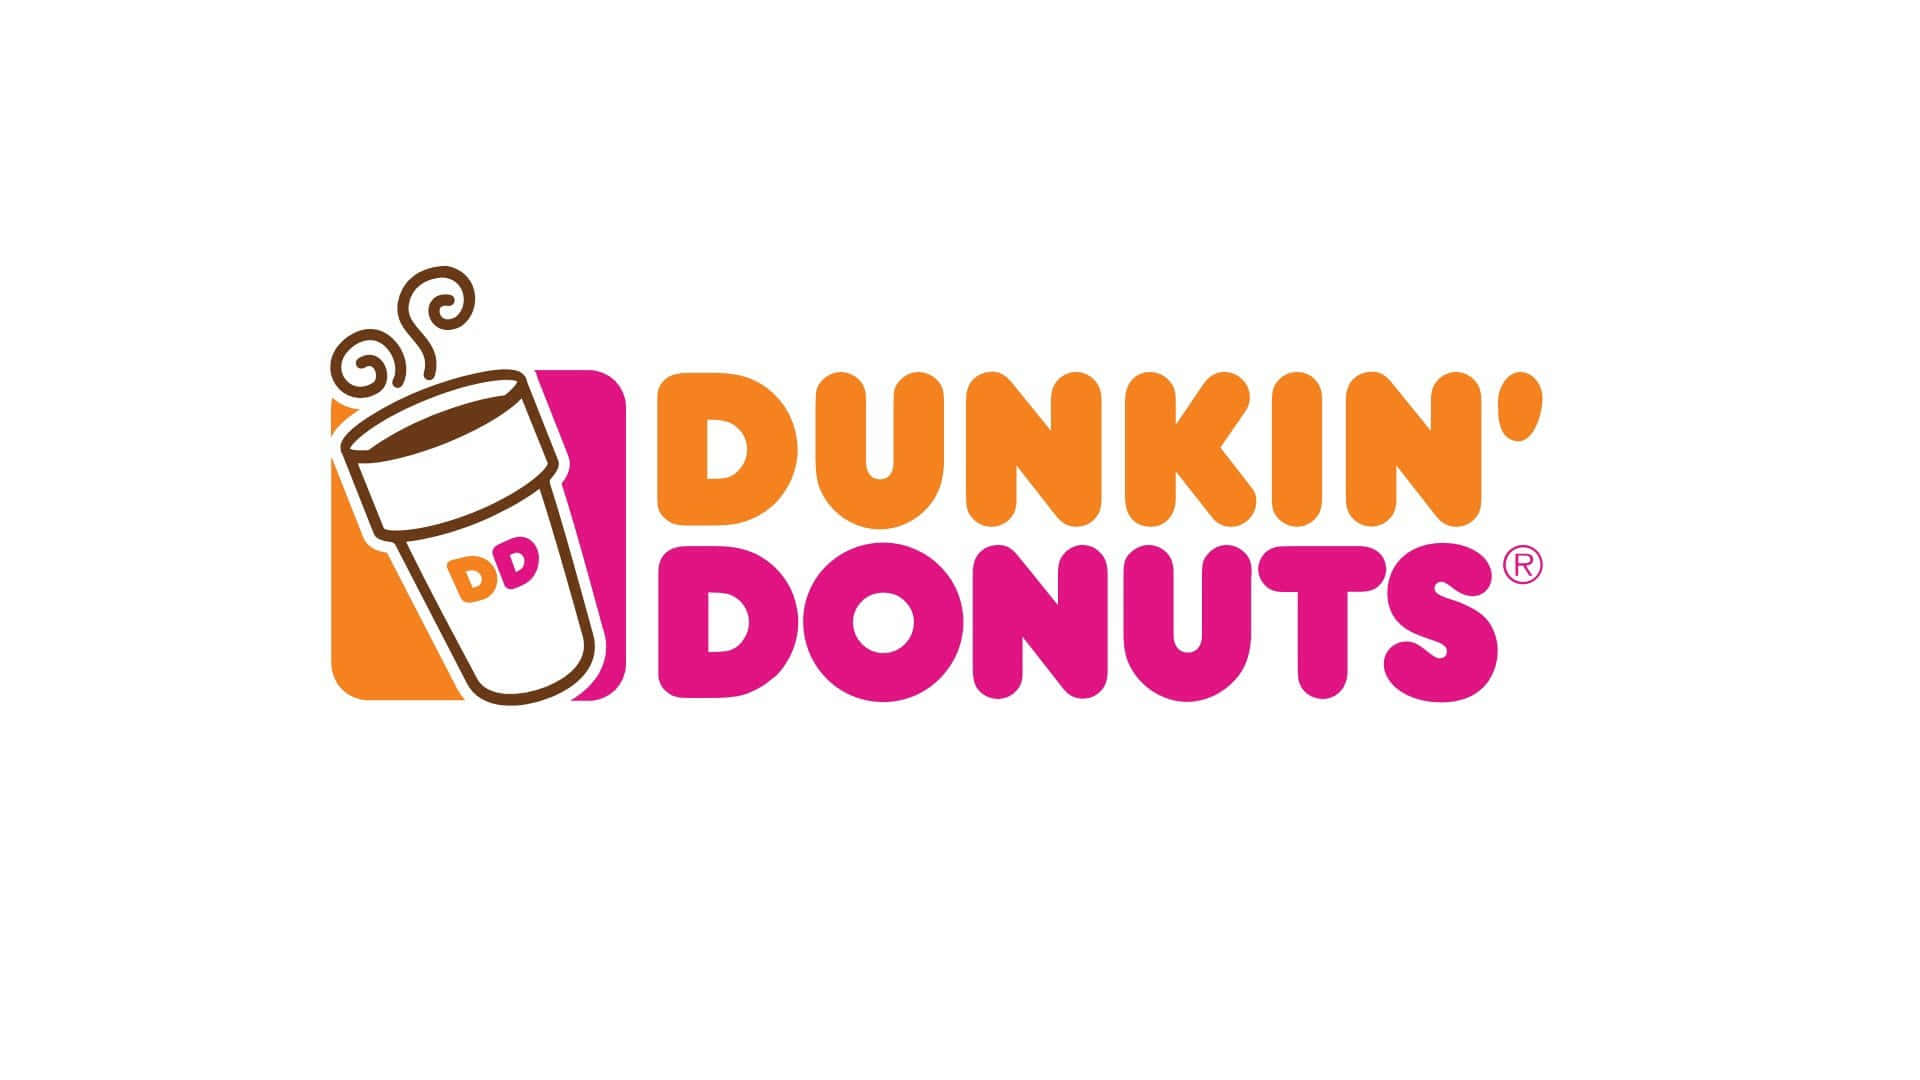 "Start your day with Dunkin Donuts!"